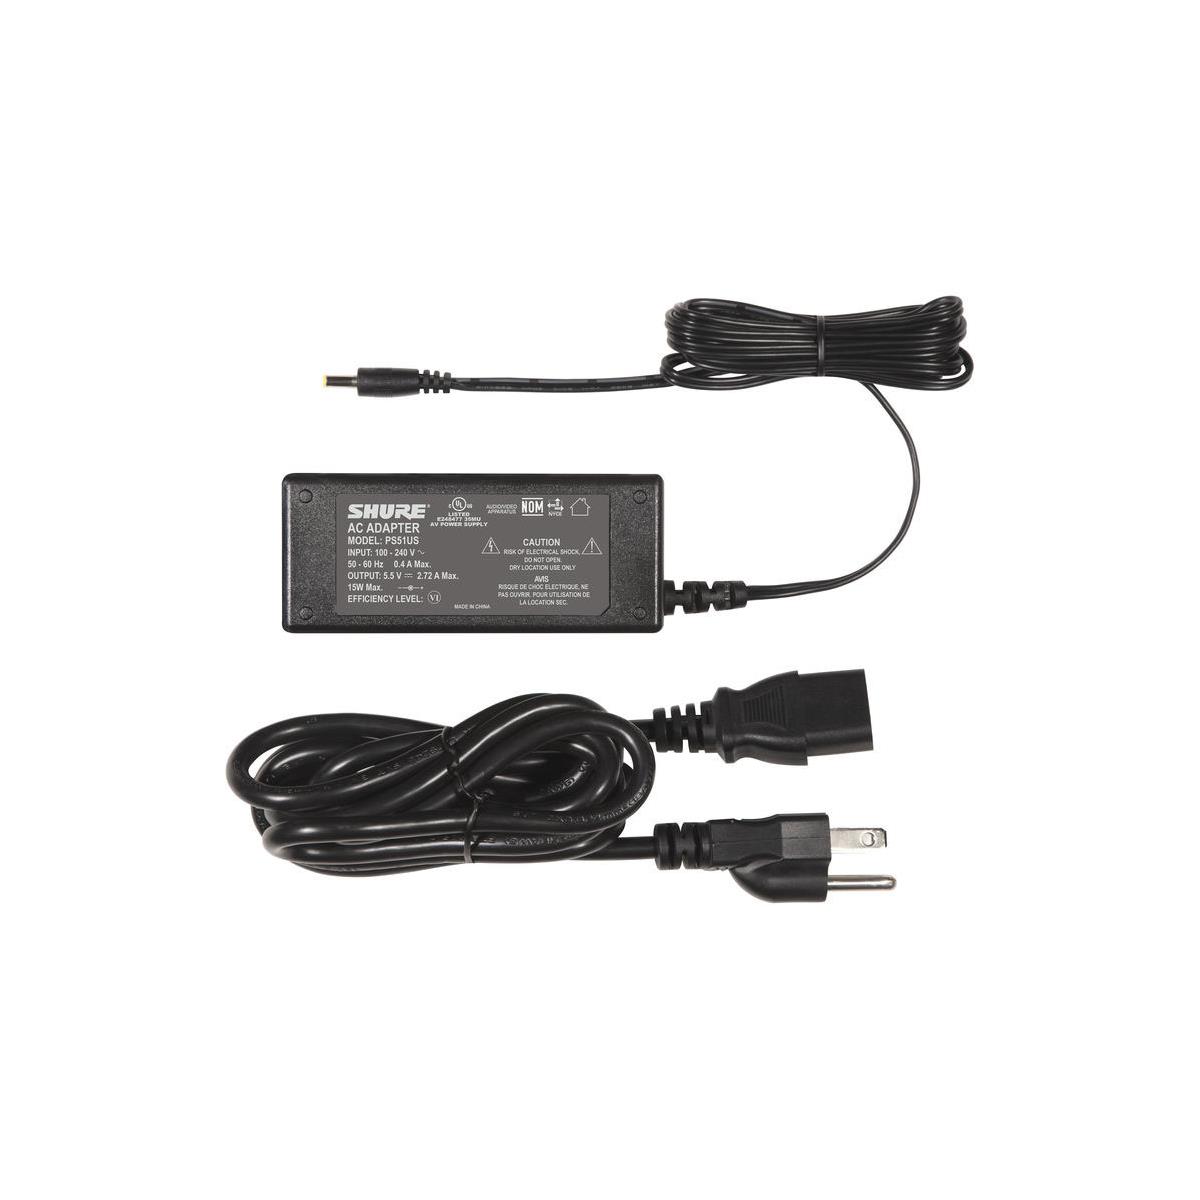 Image of Shure 15 VDC Power Supply for 2 Bay Chargers